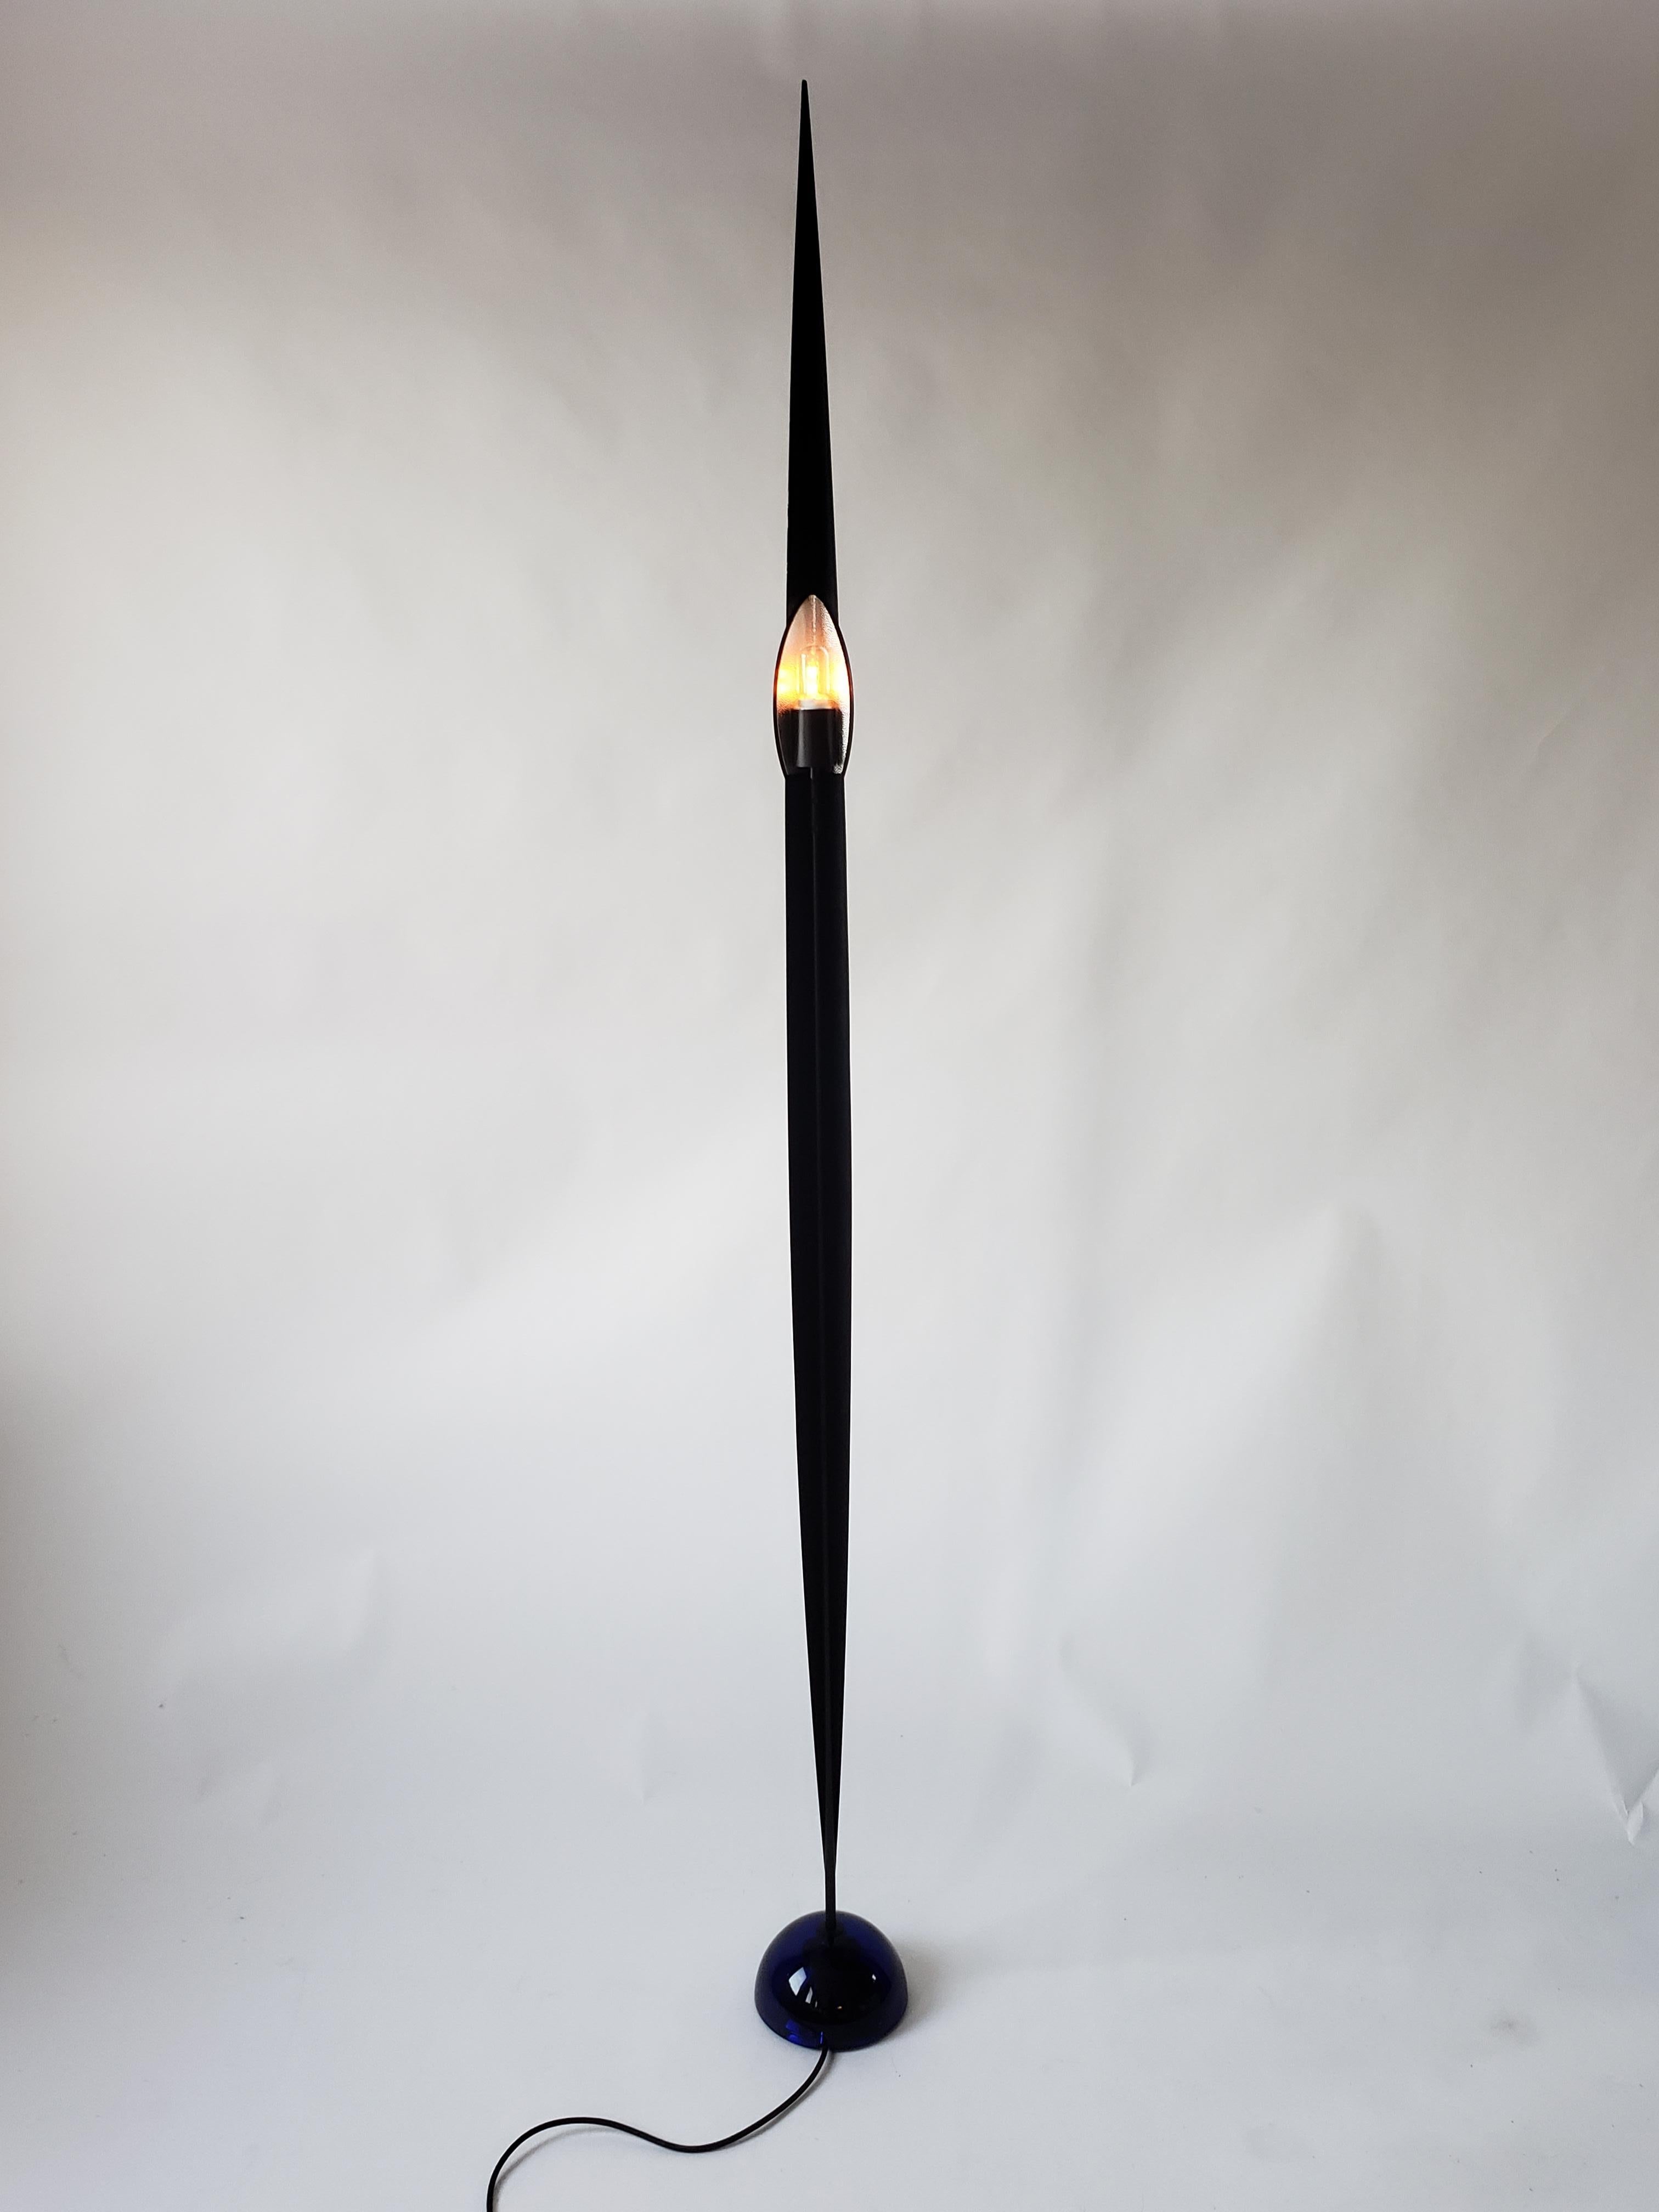 Minimalist , elegant , sculptural halogen floor lamp by Gilles Derain . 

Epoxy powder coated finish . 

Extremely thick and heavy Murano glass cobalt blue base .

81 inches high .

E26 thick ceramic socket rated at 250 watts . 

 After